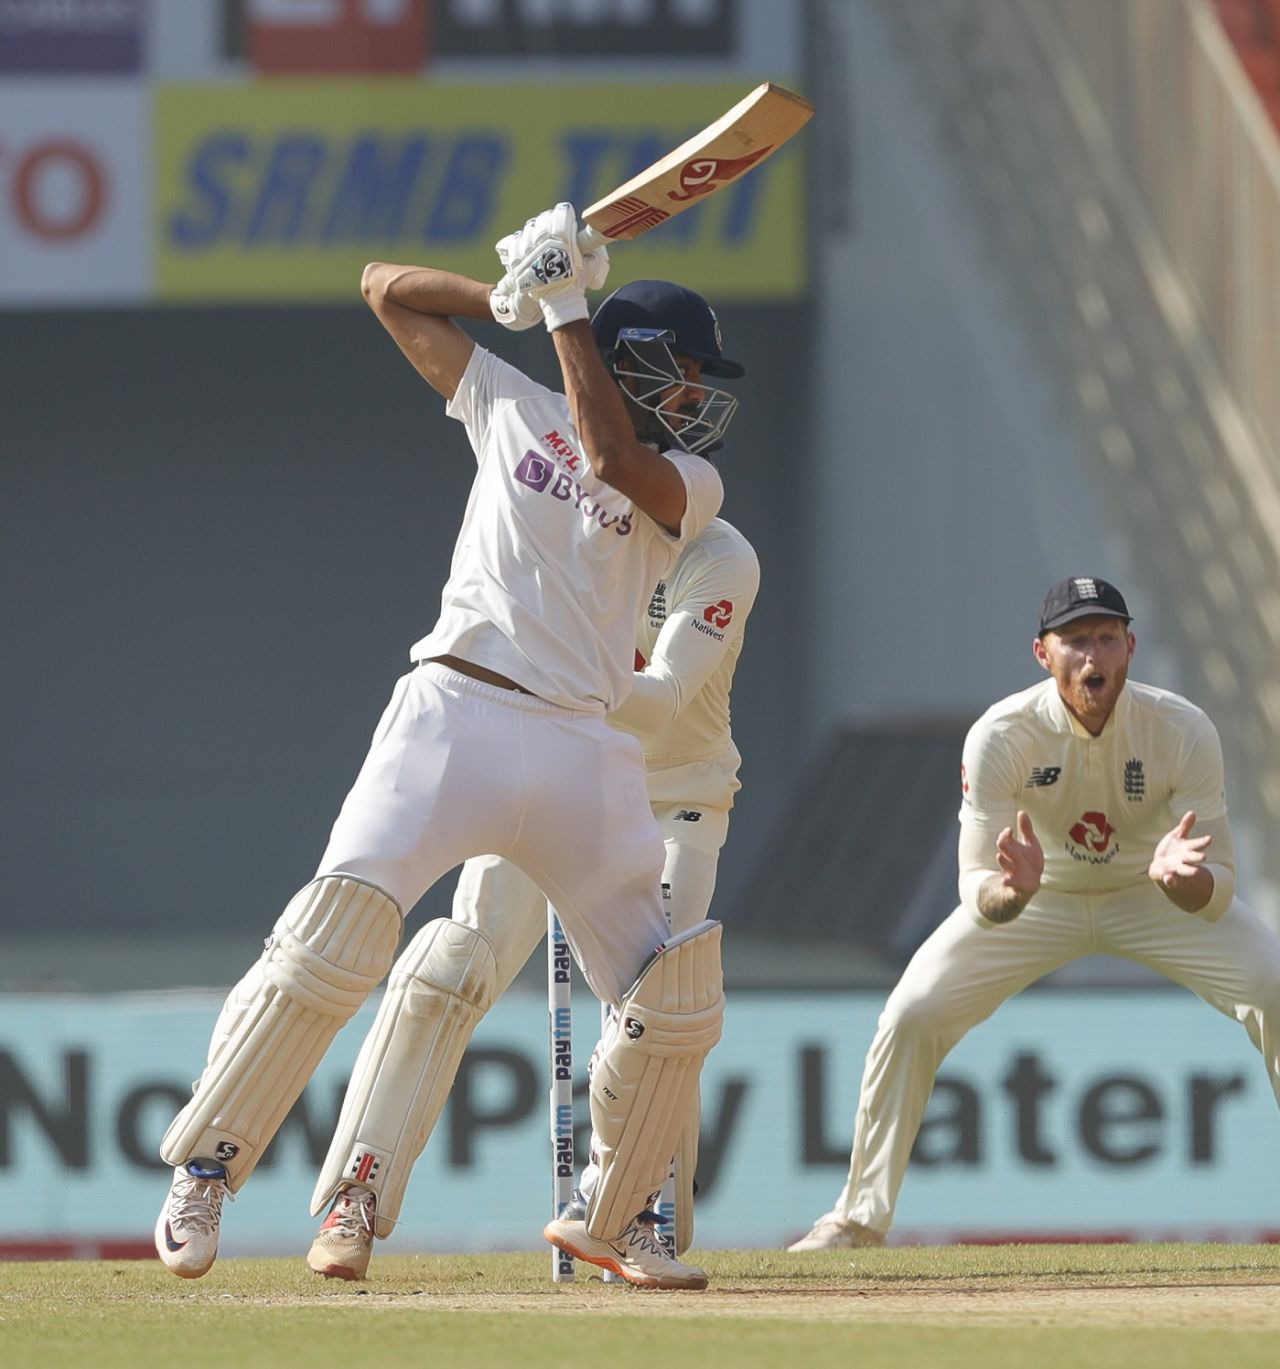 Axar Patel plays a cut, India vs England, 4th Test, Ahmedabad, 3rd day, March 6, 2021

